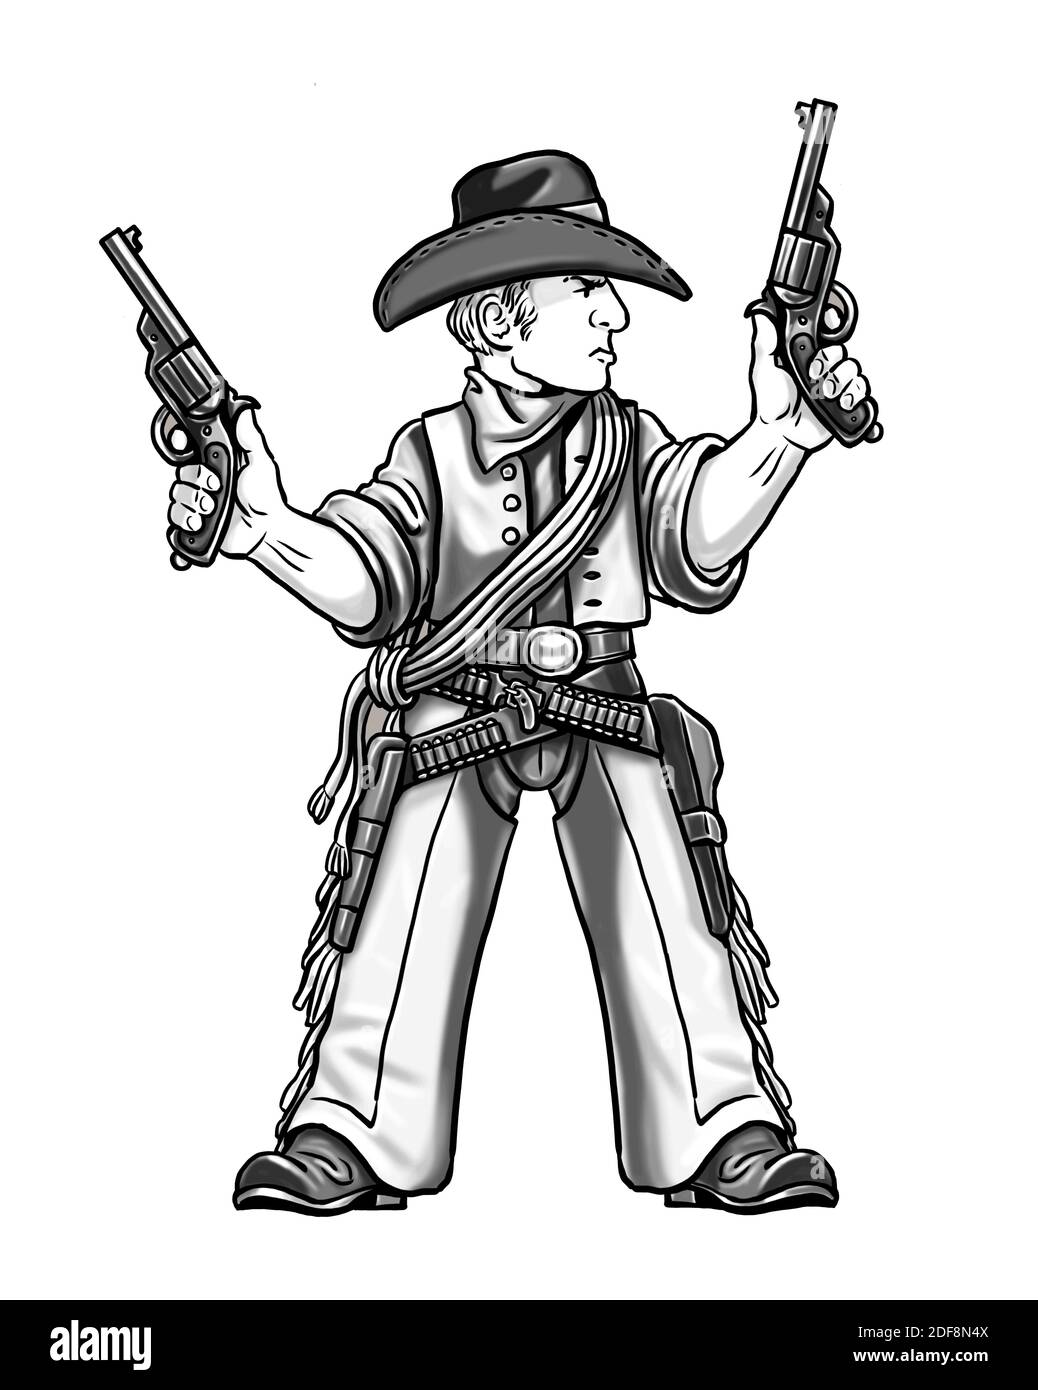 Wild west gunfighter cartoon. Cowboy template for coloring book. Stock Photo